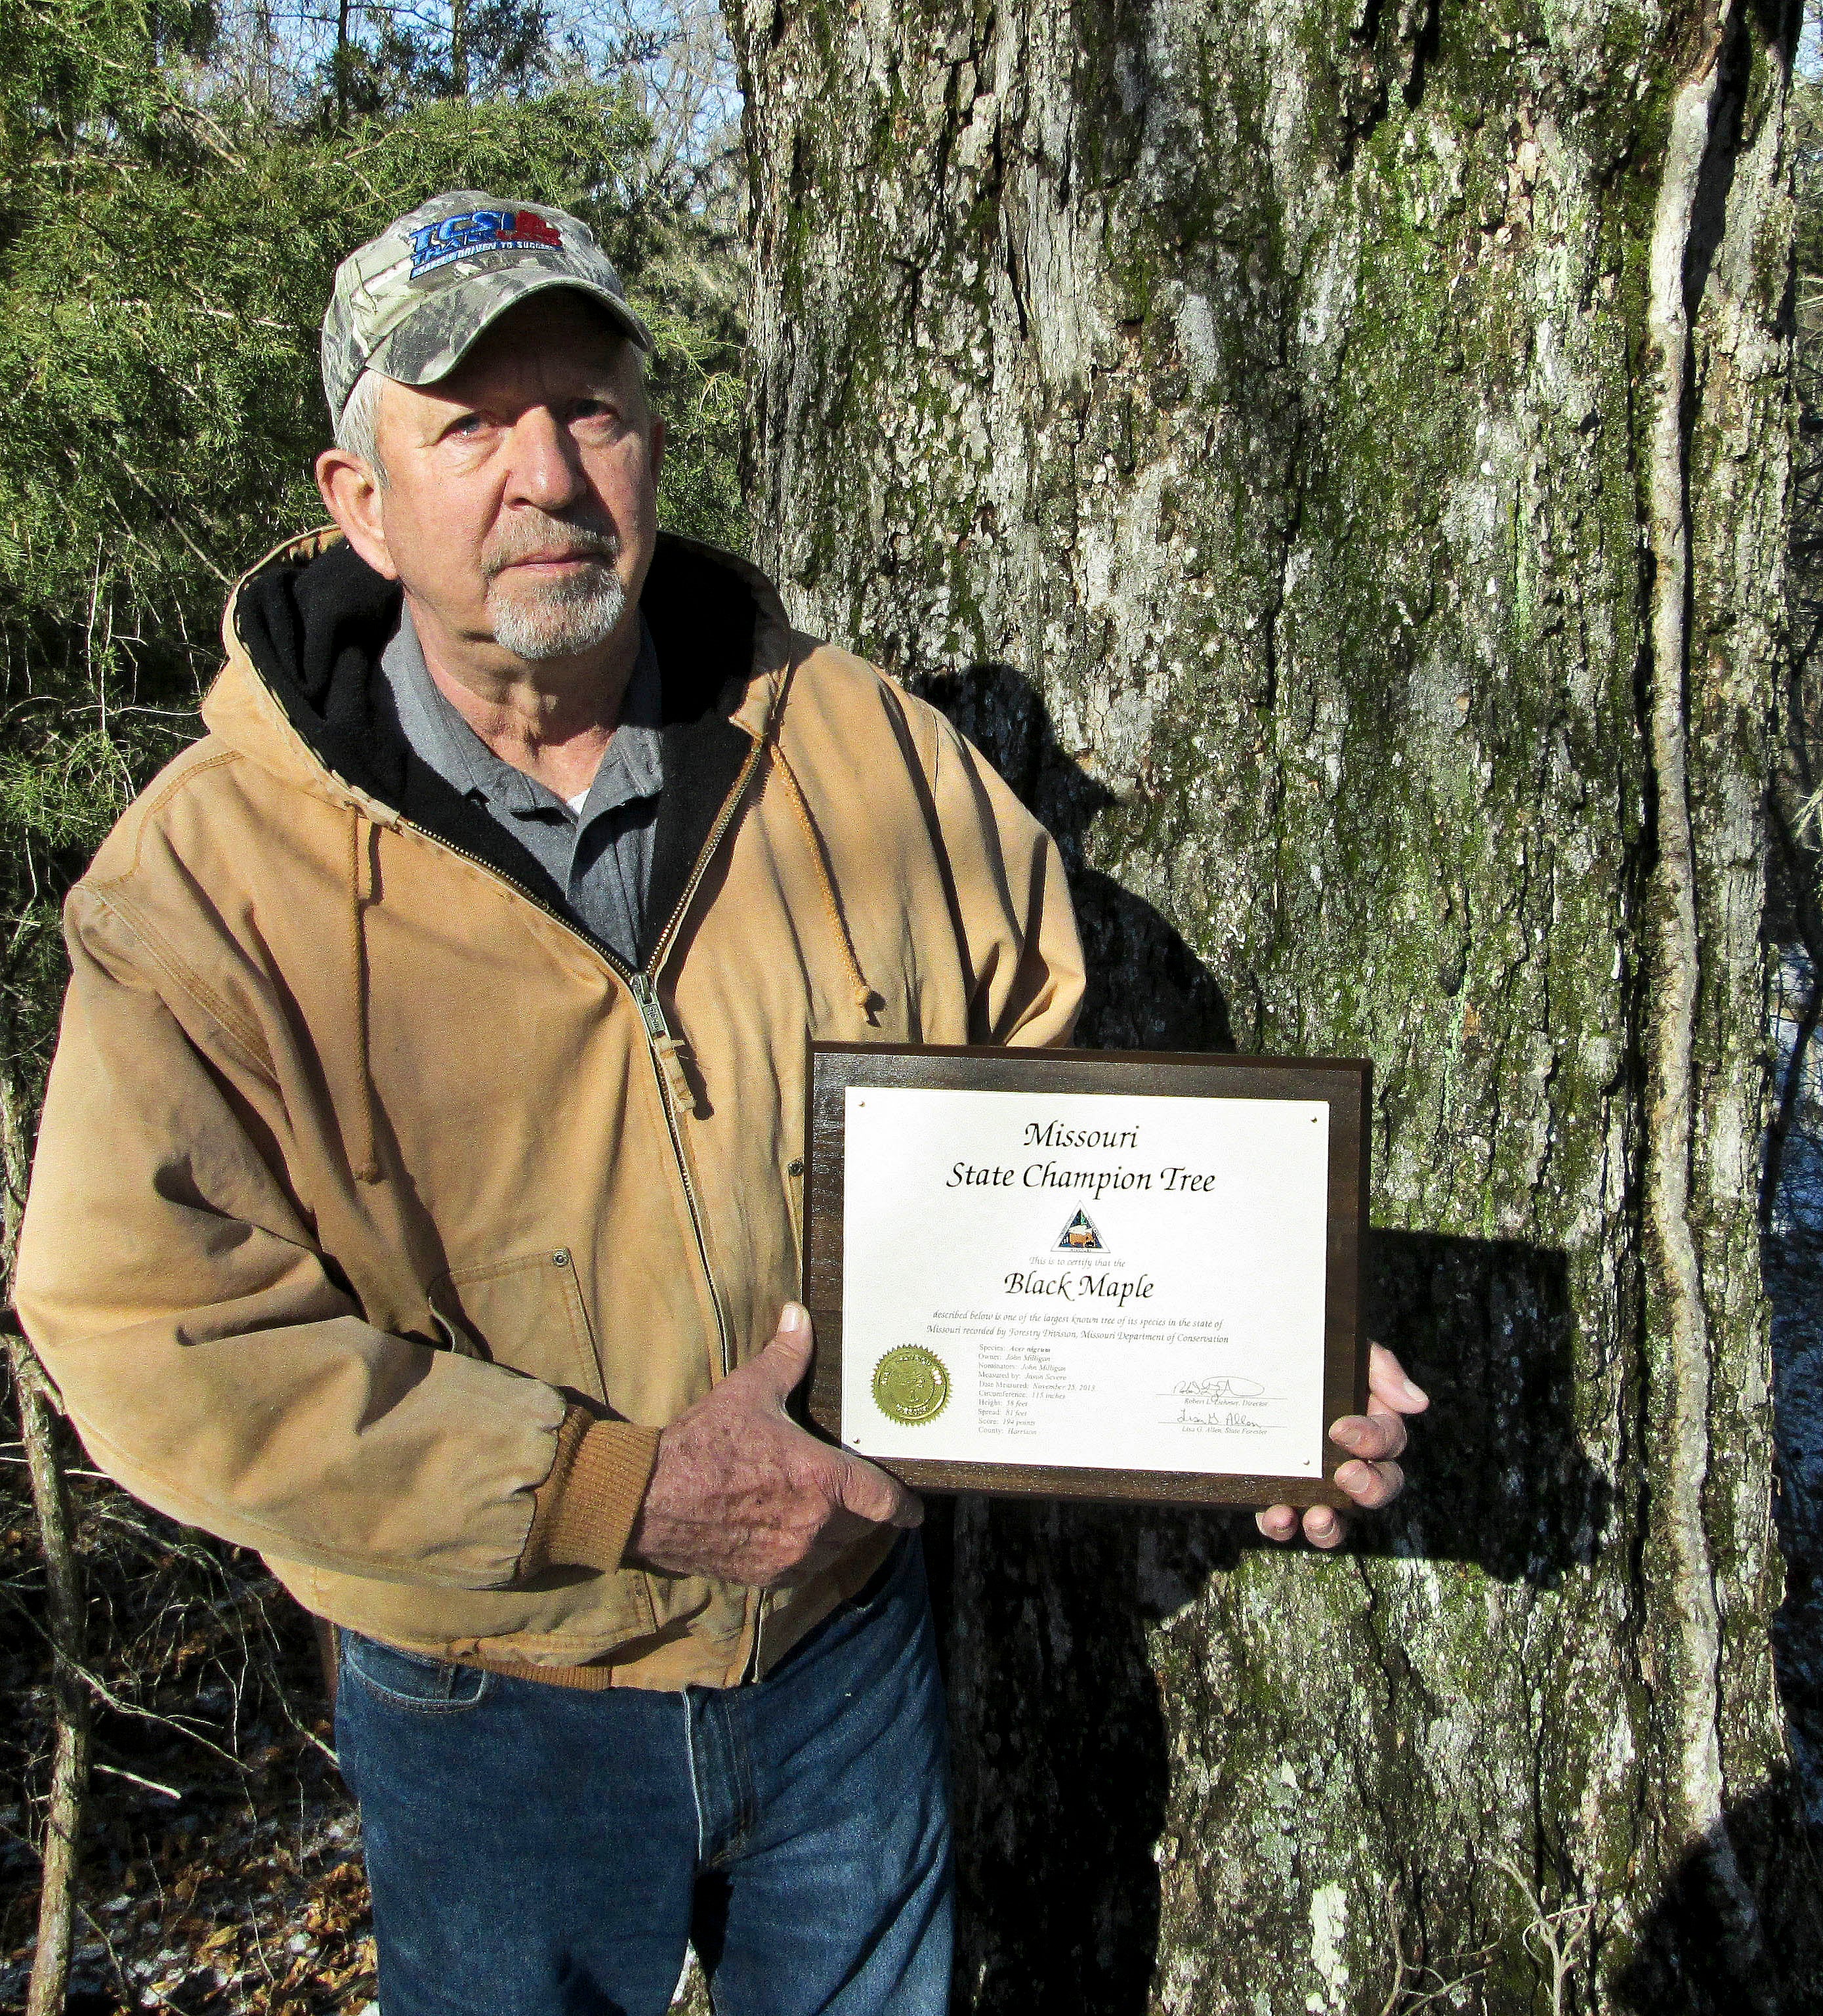 John Milligan with plaque for state champion black maple tree